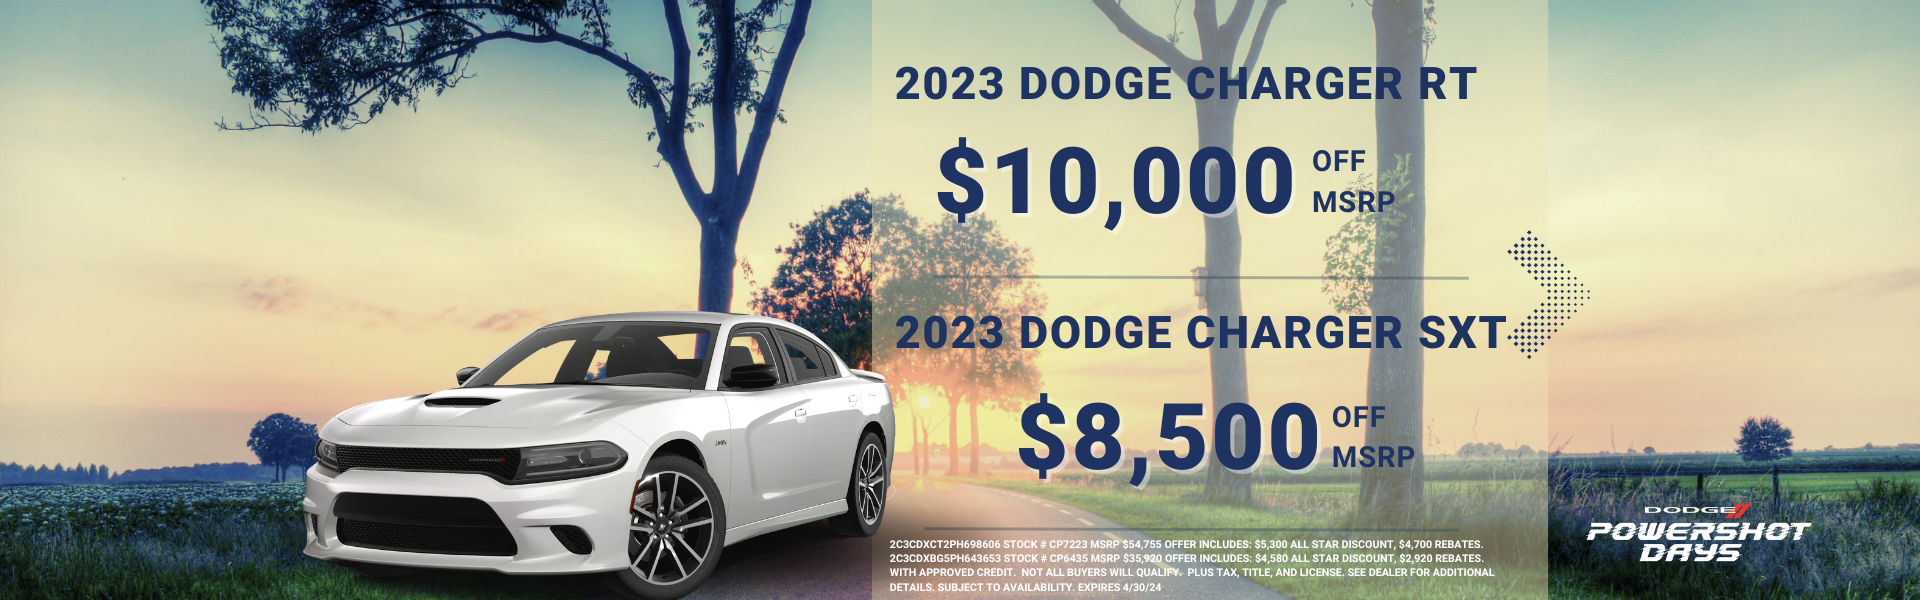 2023 Dodge Charger RT